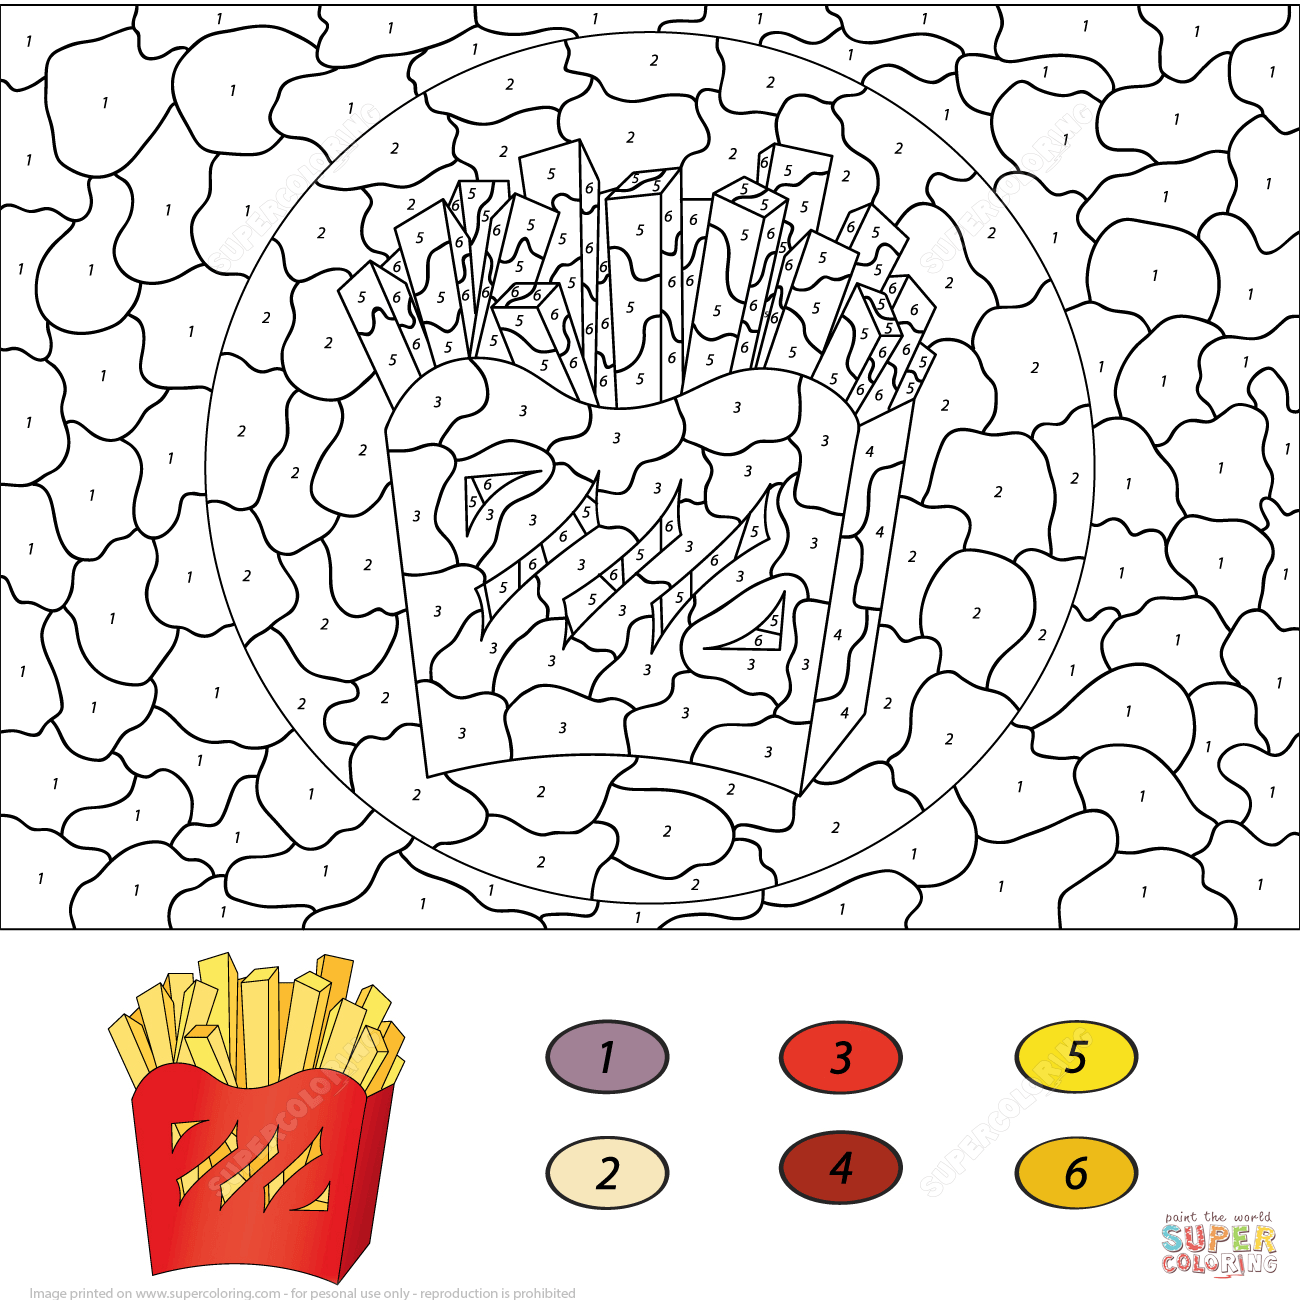 French Fries Coloring Page - Coloring Page